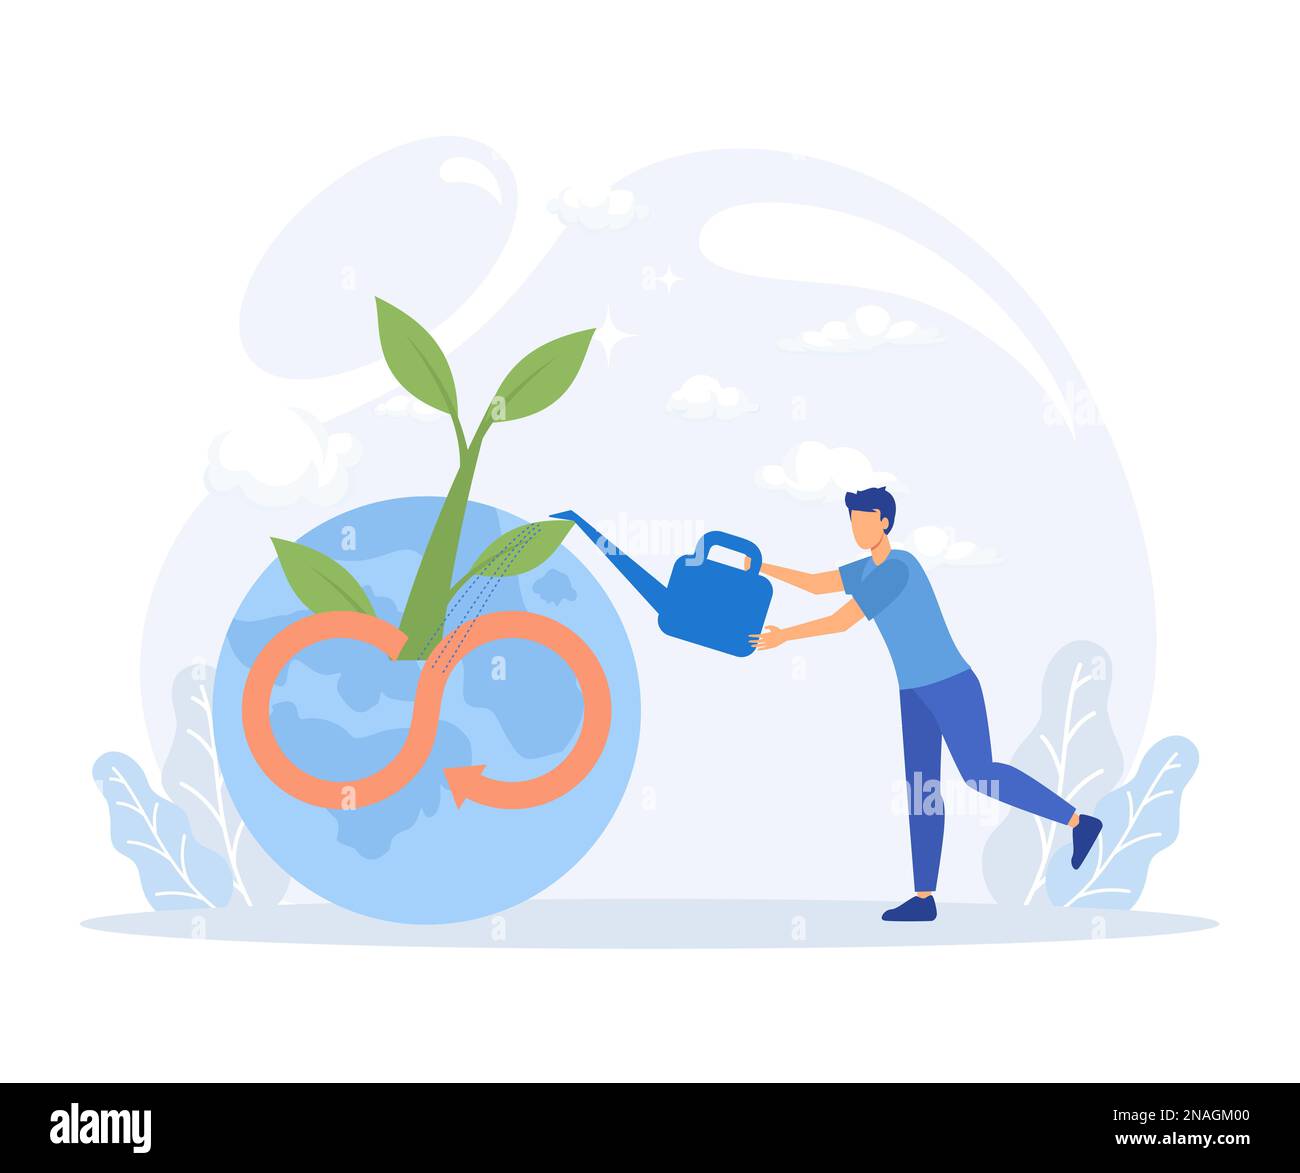 Circular economy illustration. Sustainable economic growth, recourses reuse and reduce co2 emission and climate impact. ESG, green energy and industry Stock Vector